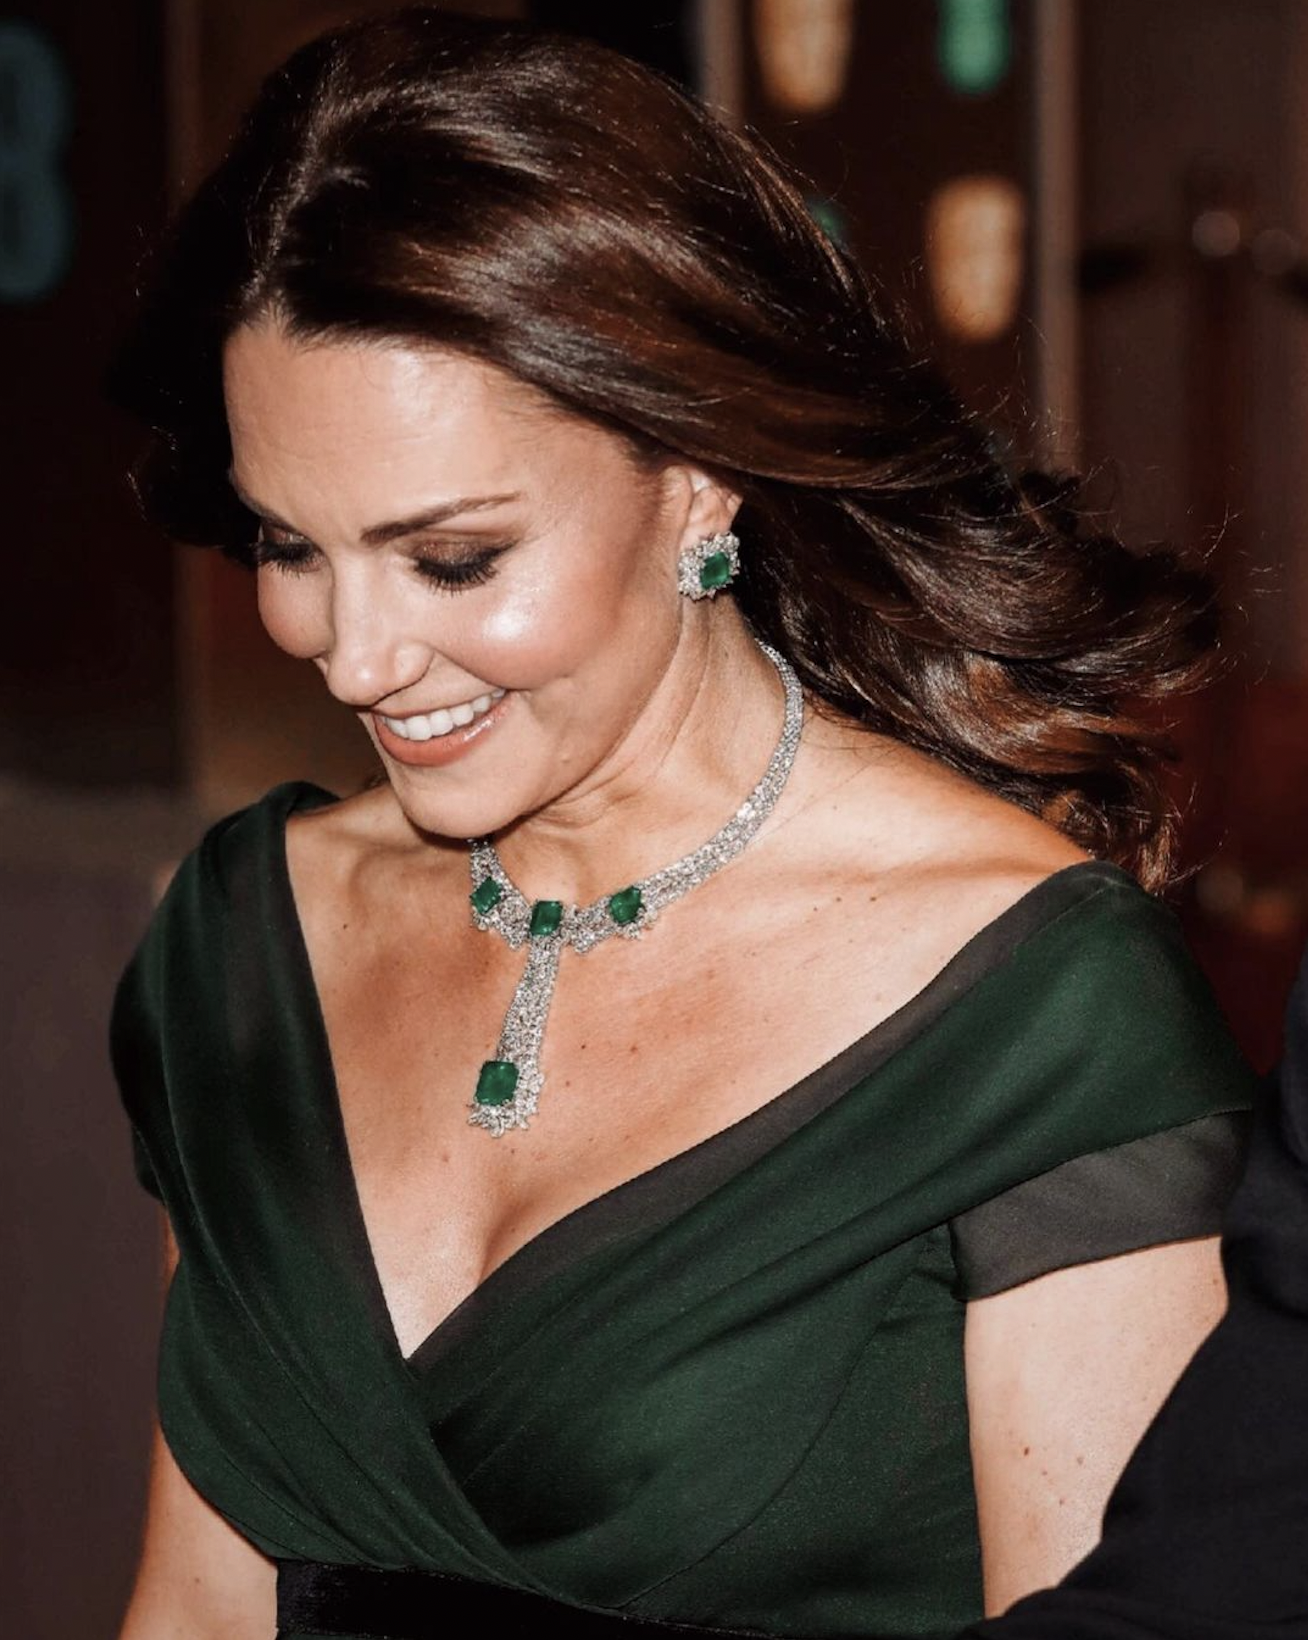 Duchess of Cambridge Kate Middleton shows off a baguette-cut emerald necklace and earrings high jewellery set in 2018. Photo: @_kate_middleton_royal/Instagram